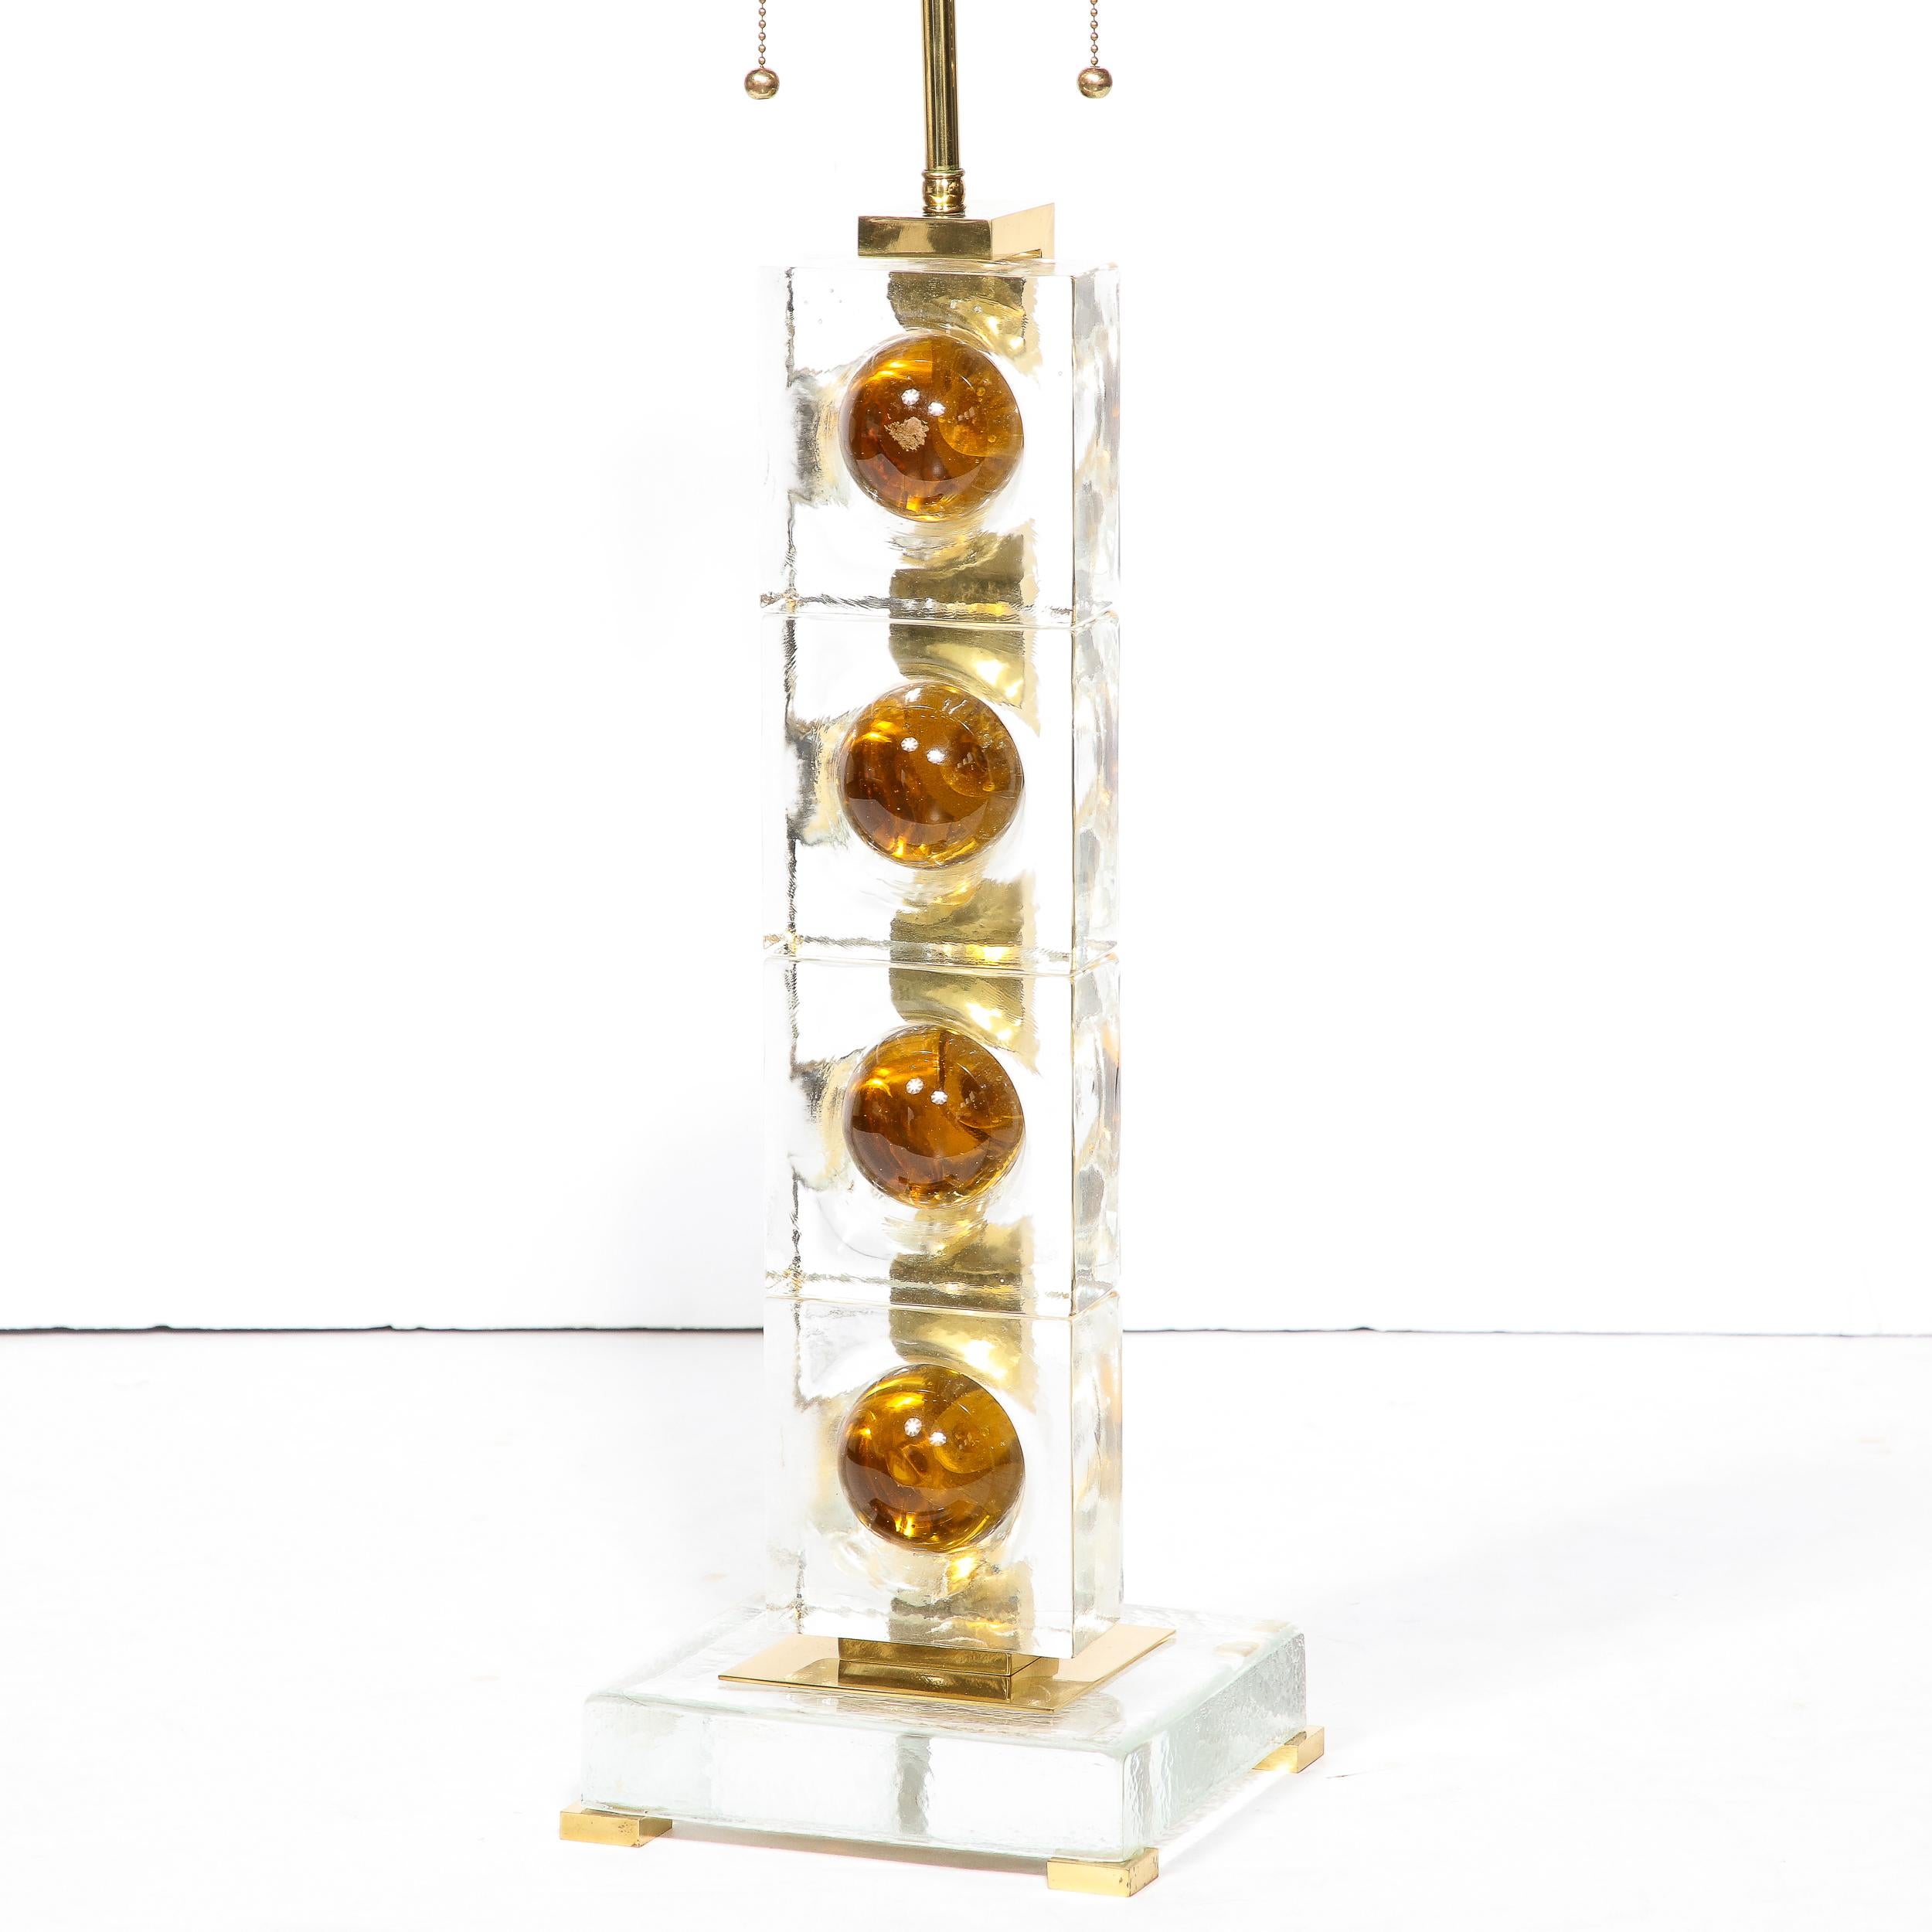 Pair of Modernist Stacked Sphere Table Lamps in Amber & Translucent Murano Glass 2